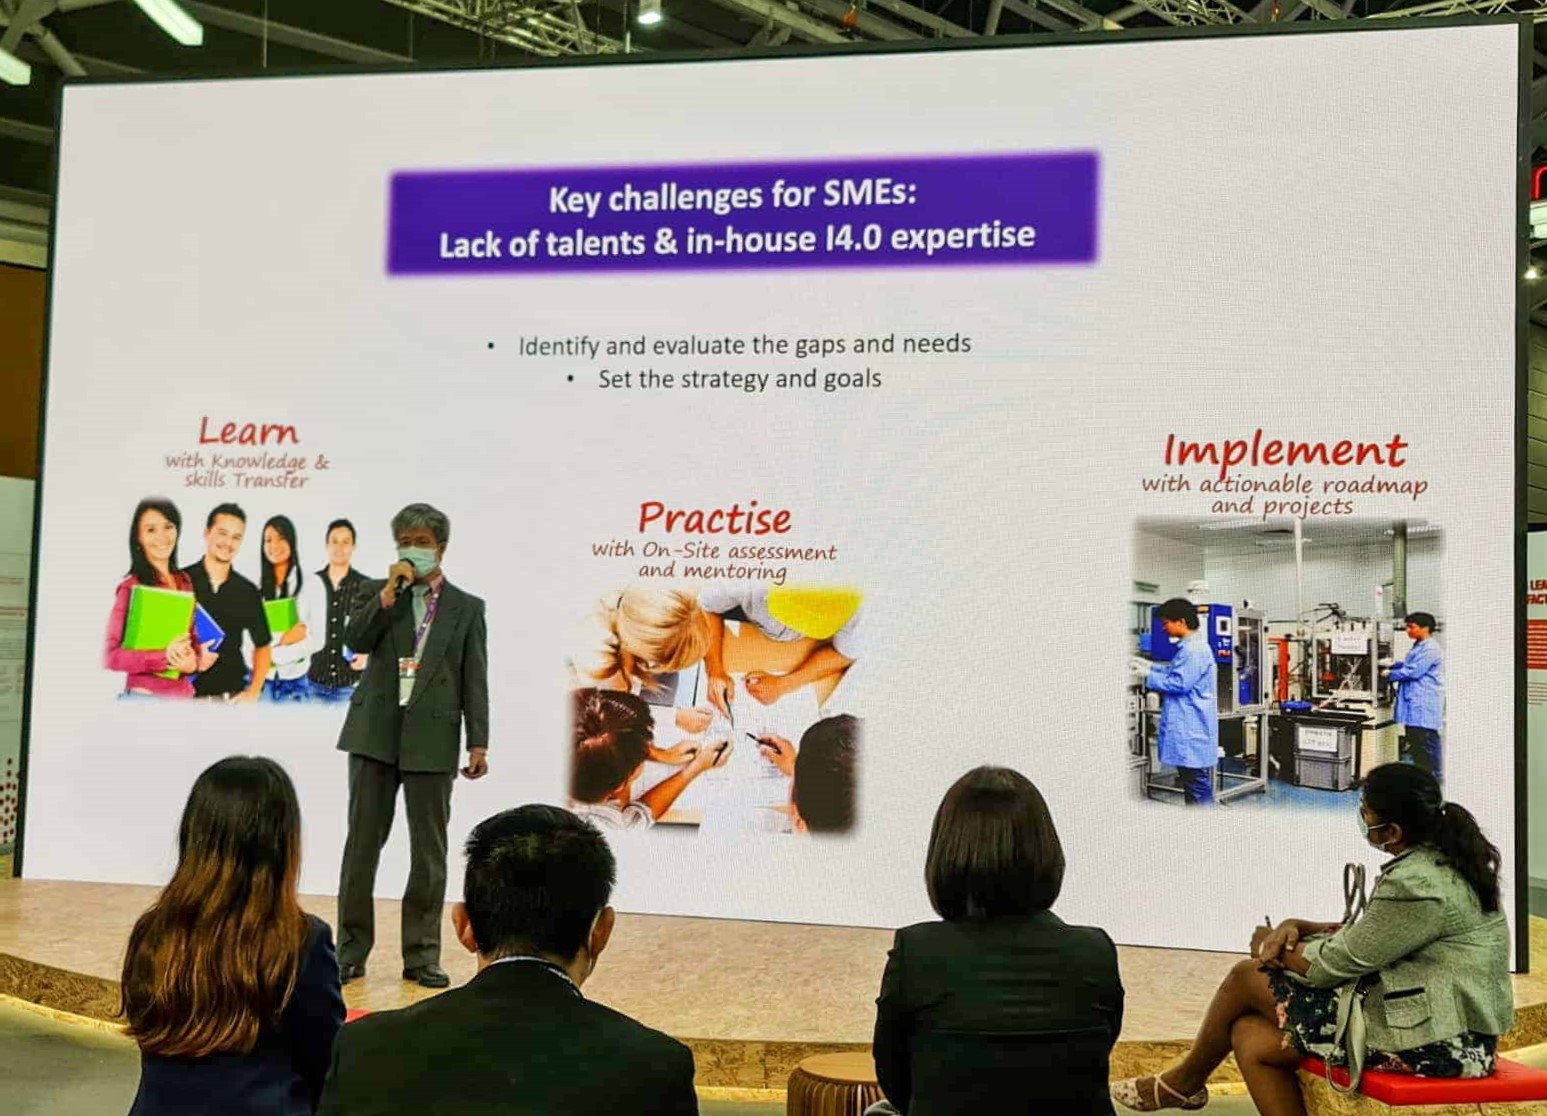 AMTA ITAP 2021 – TED TALK ON CREATING REAL IMPACTS THROUGH WORKFORCE TRAINING, HOSTED BY SKILLSFUTURE SINGAPORE (SSG)